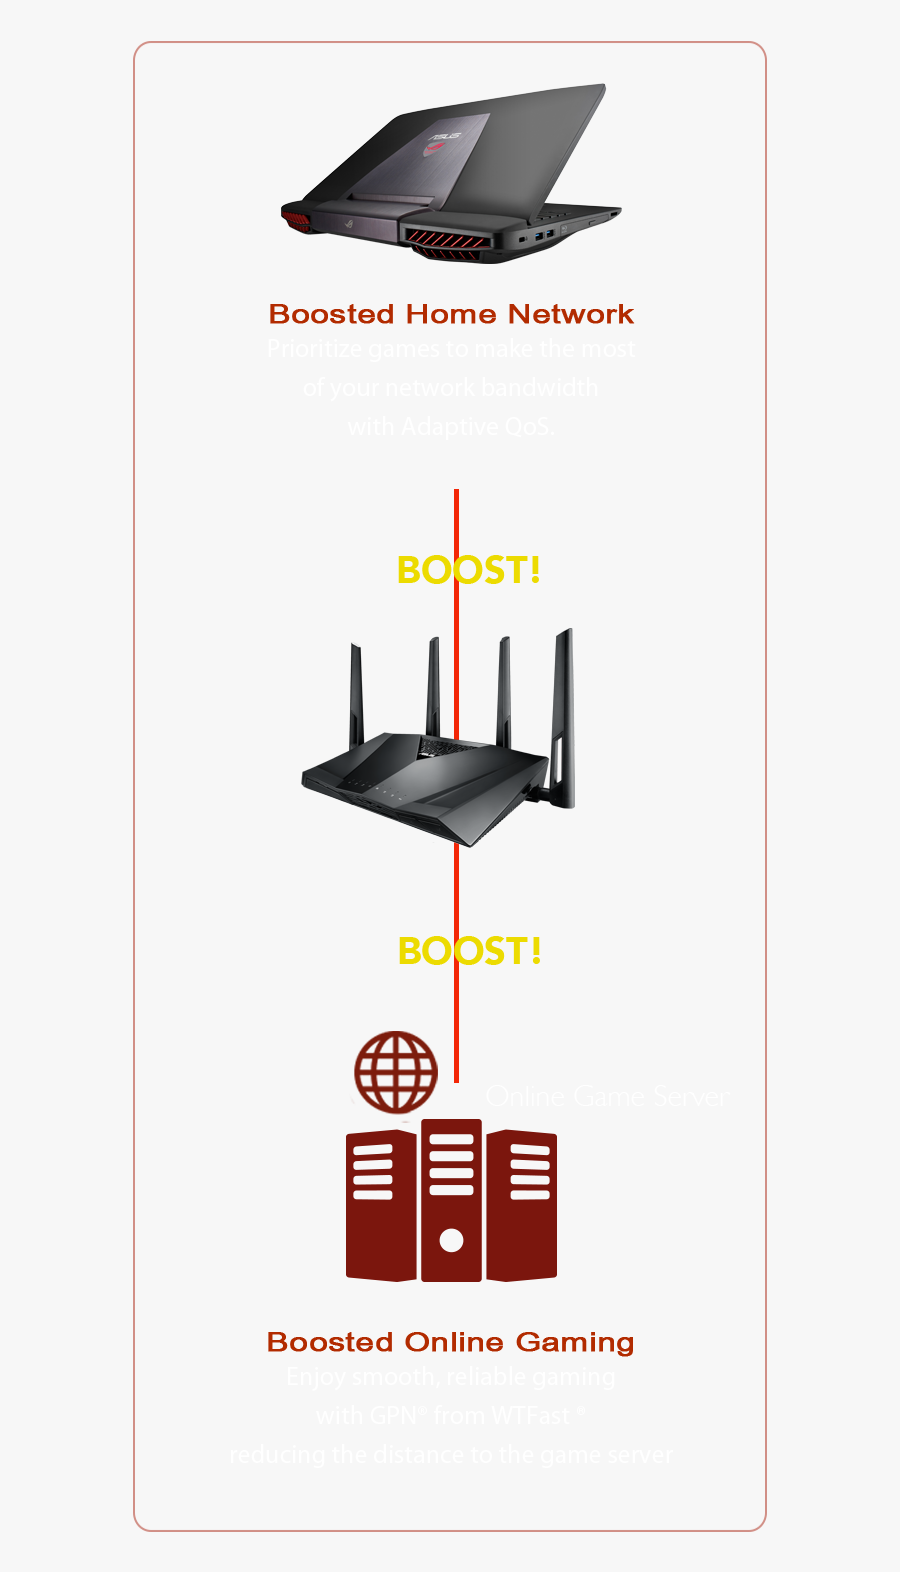 Rt-ac3100 Gaming Router Boosts Both Home Network And - Computer Network, Transparent Clipart